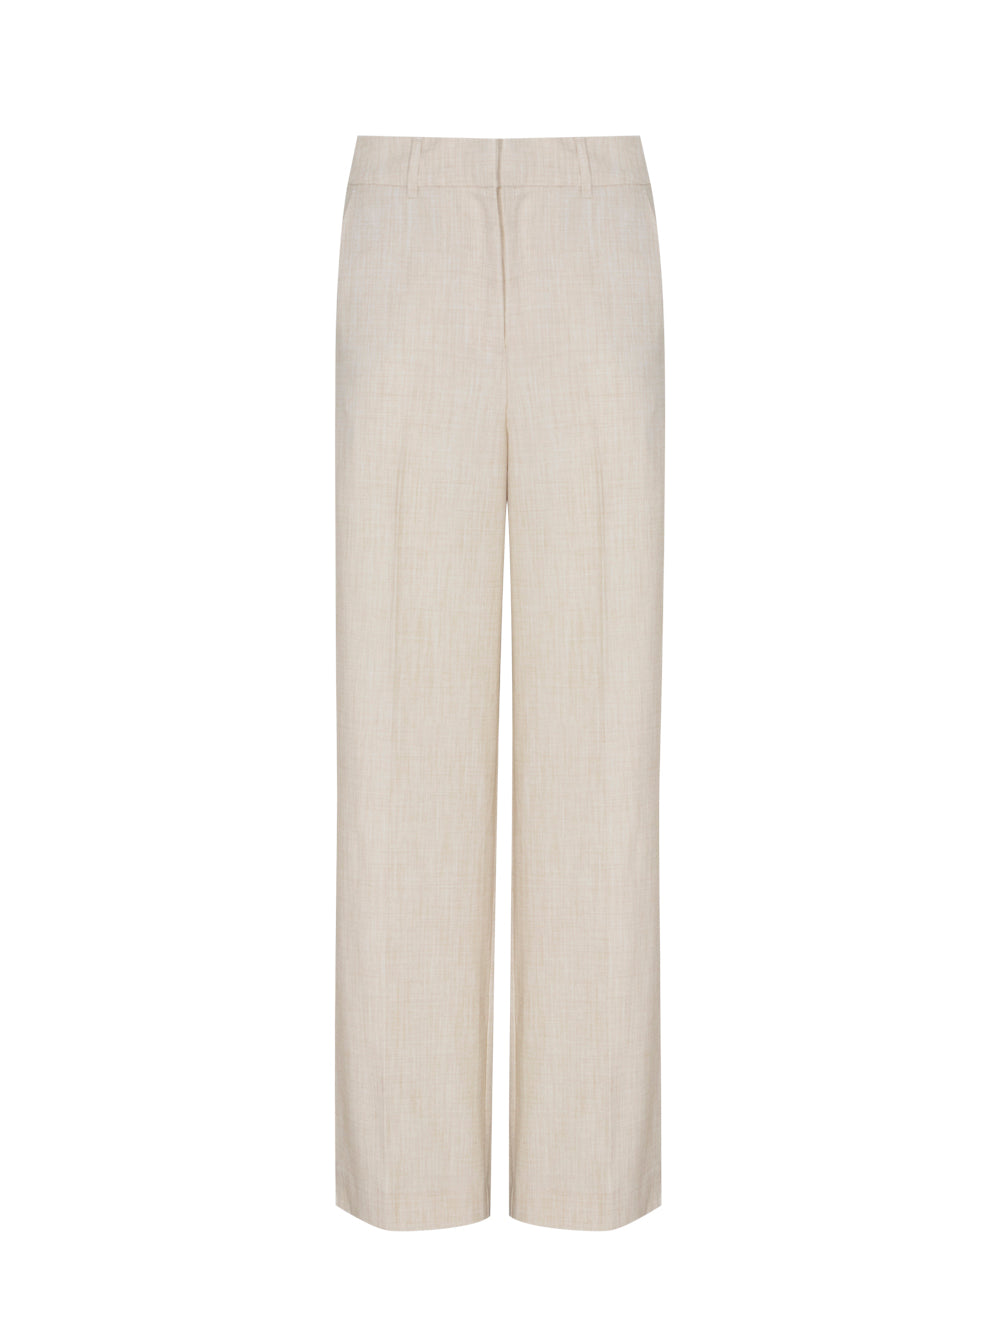 Woven Pants With Openings On The Bottom (Oat)